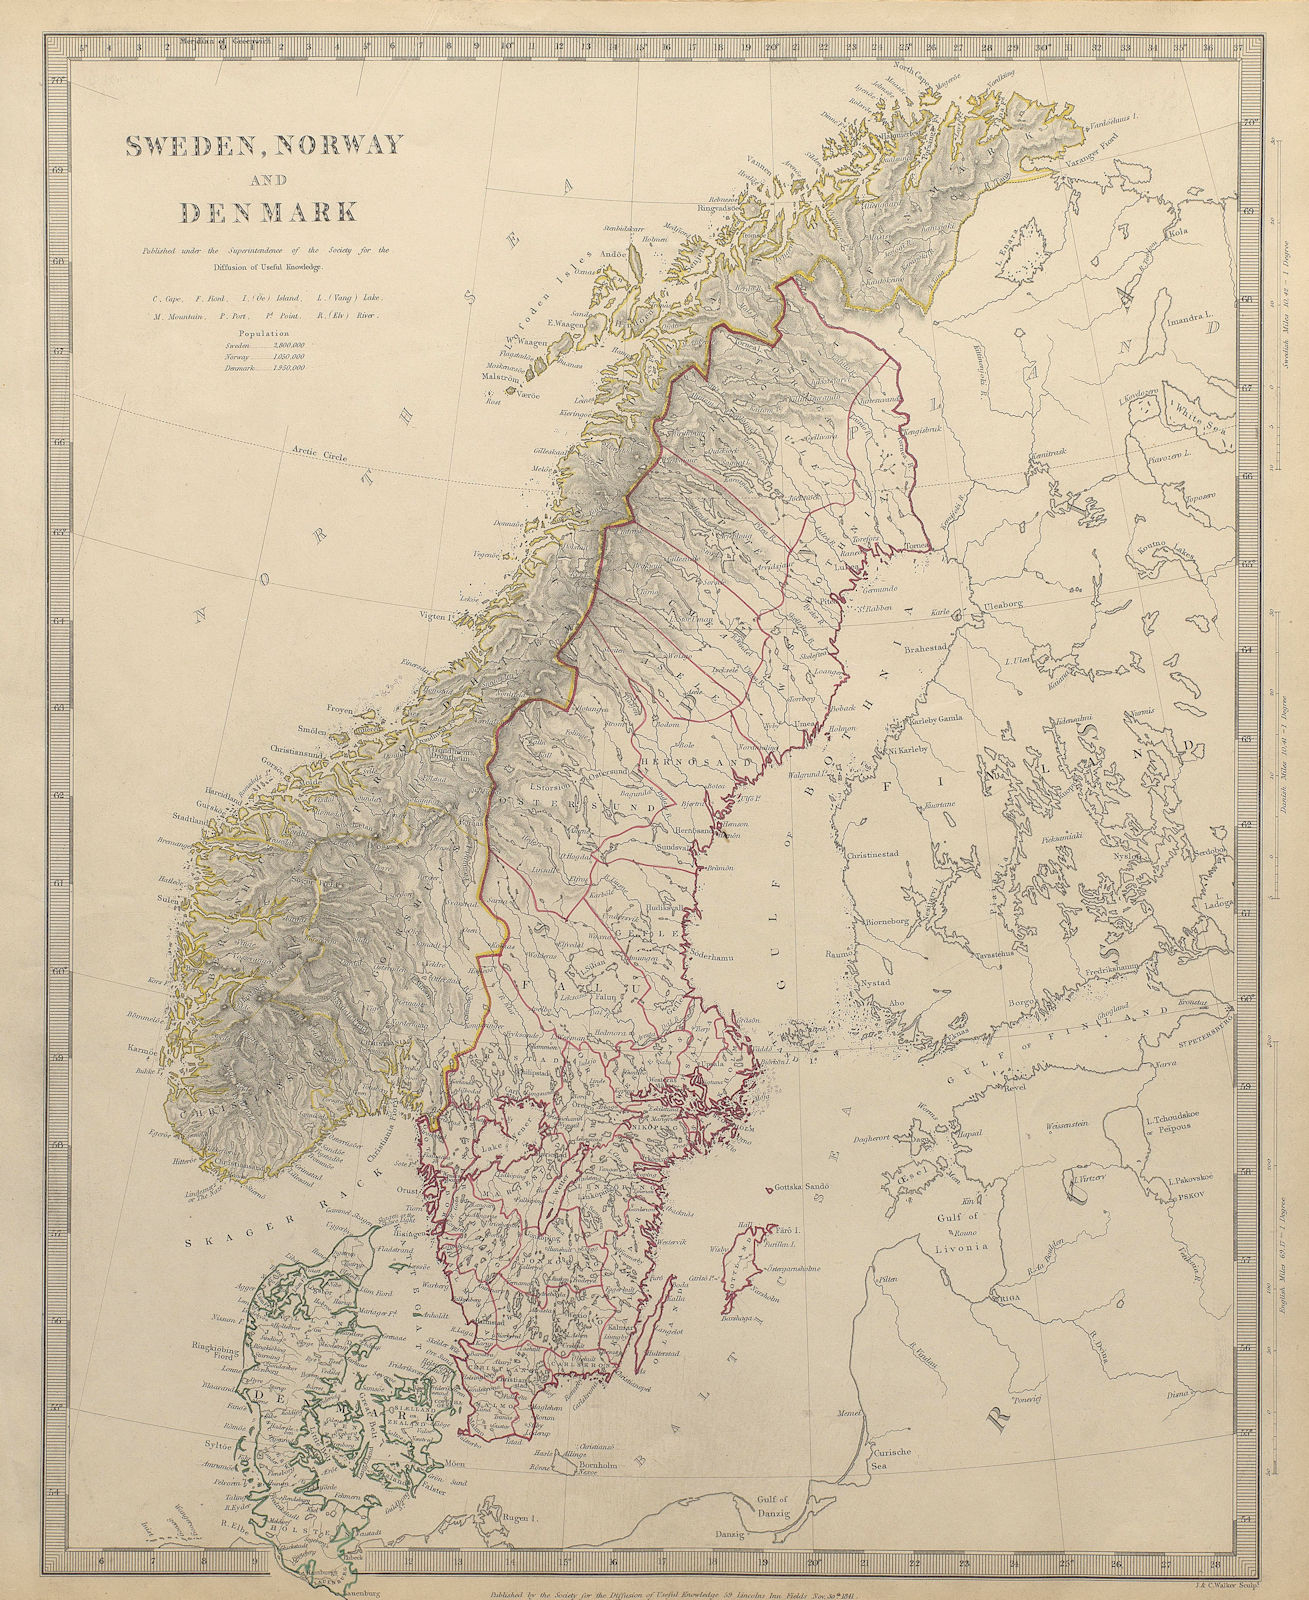 SCANDINAVIA. Sweden, Norway, and Denmark. Population table. SDUK 1844 old map